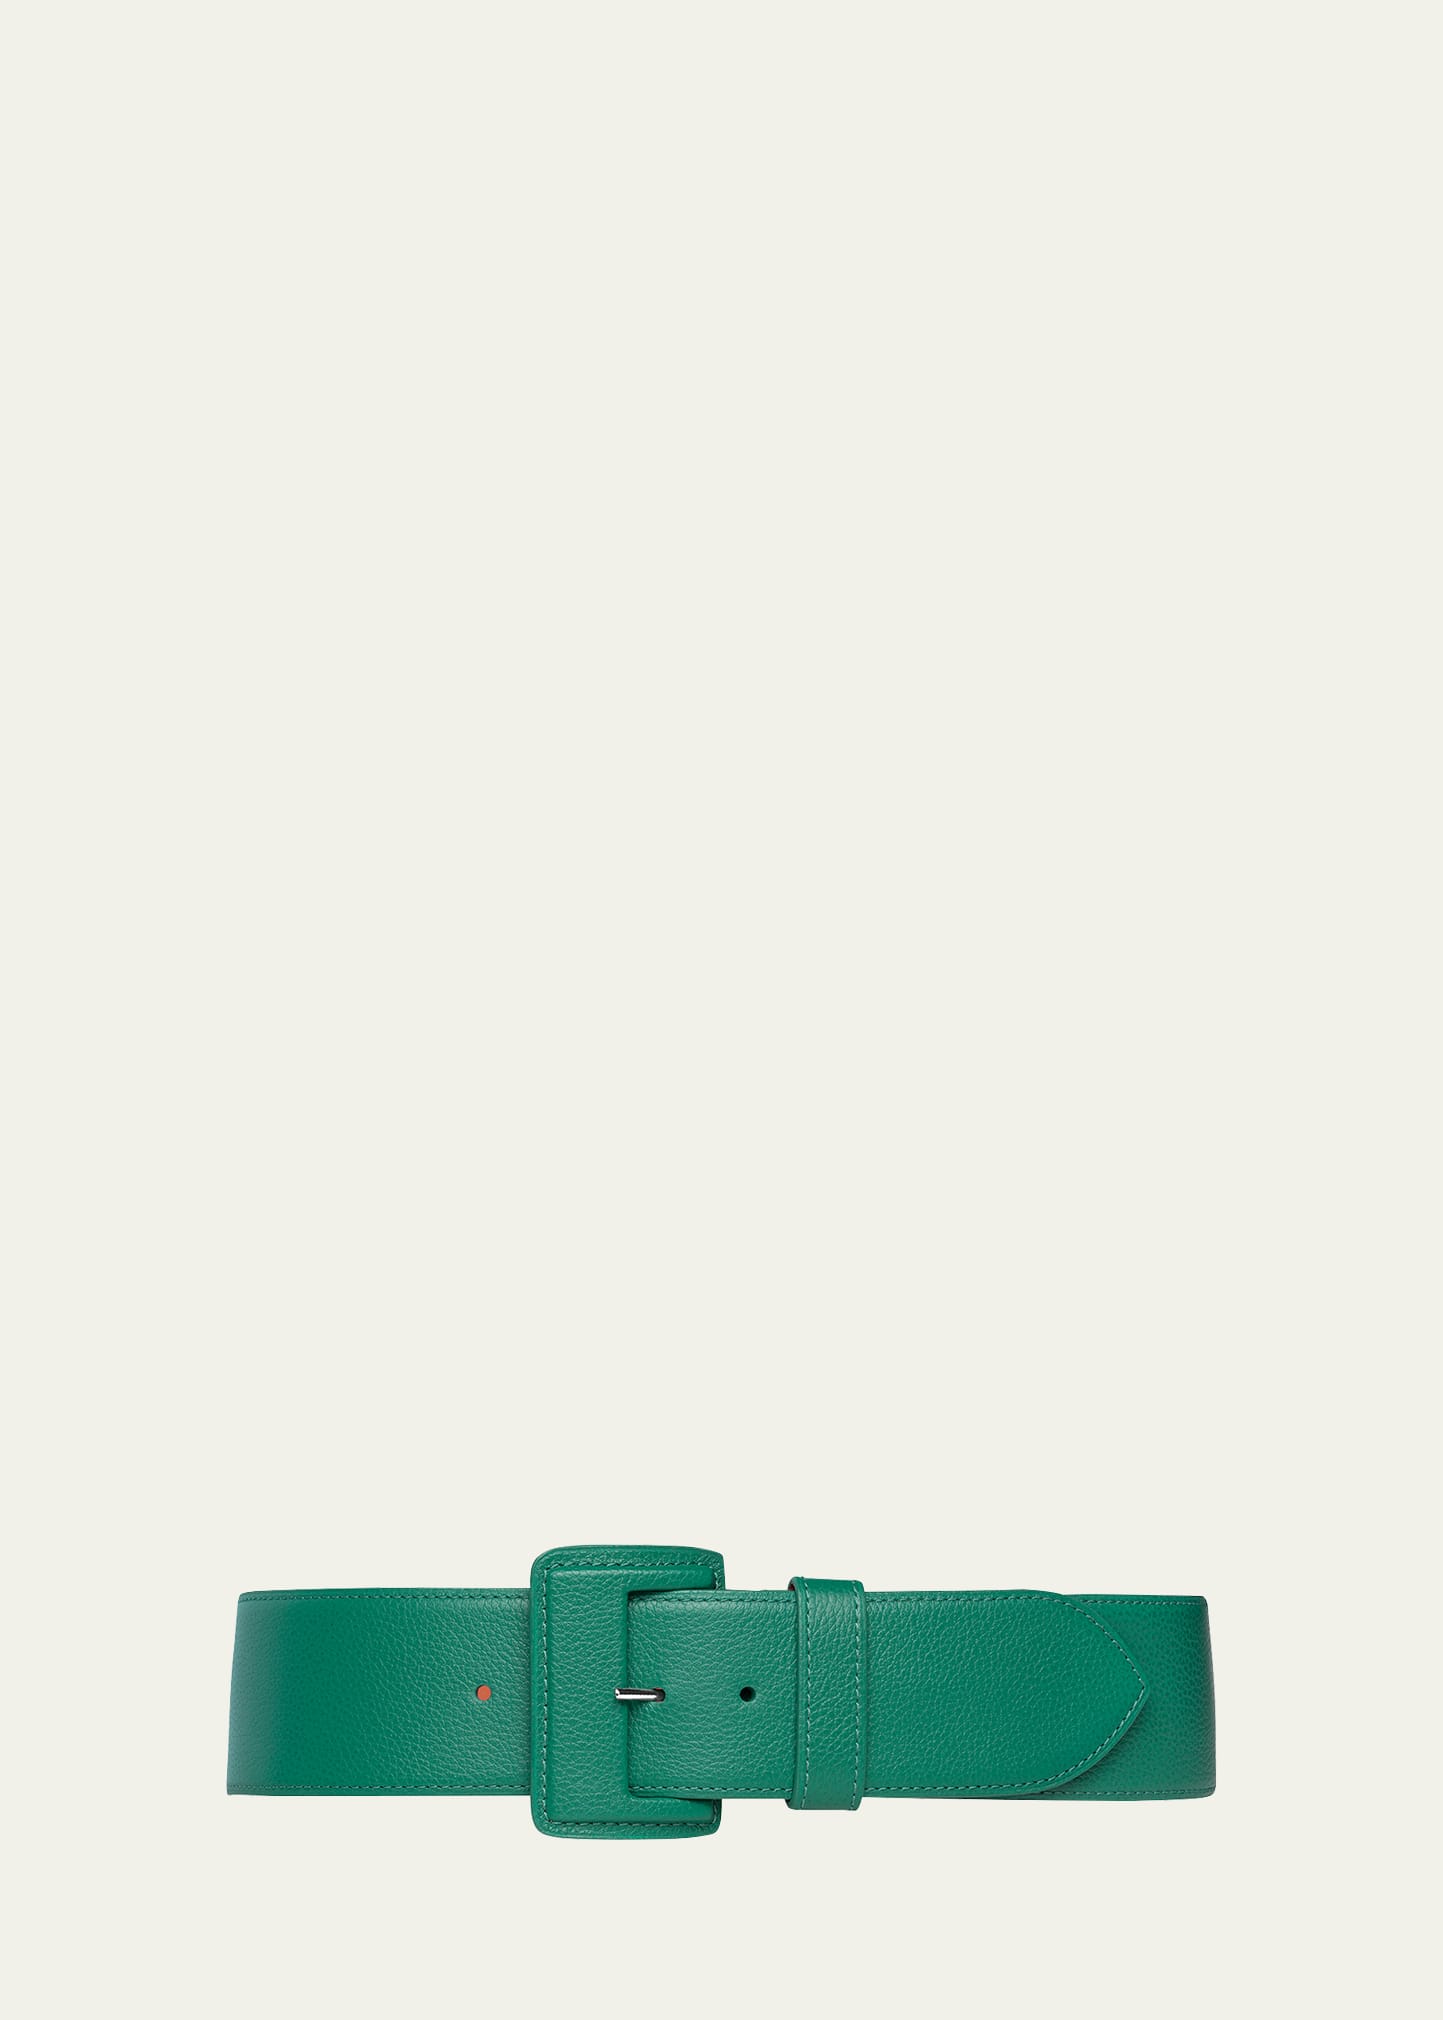 Vaincourt Paris La Merveilleuse Large Pebbled Leather Belt With Covered Buckle In Green / Blue